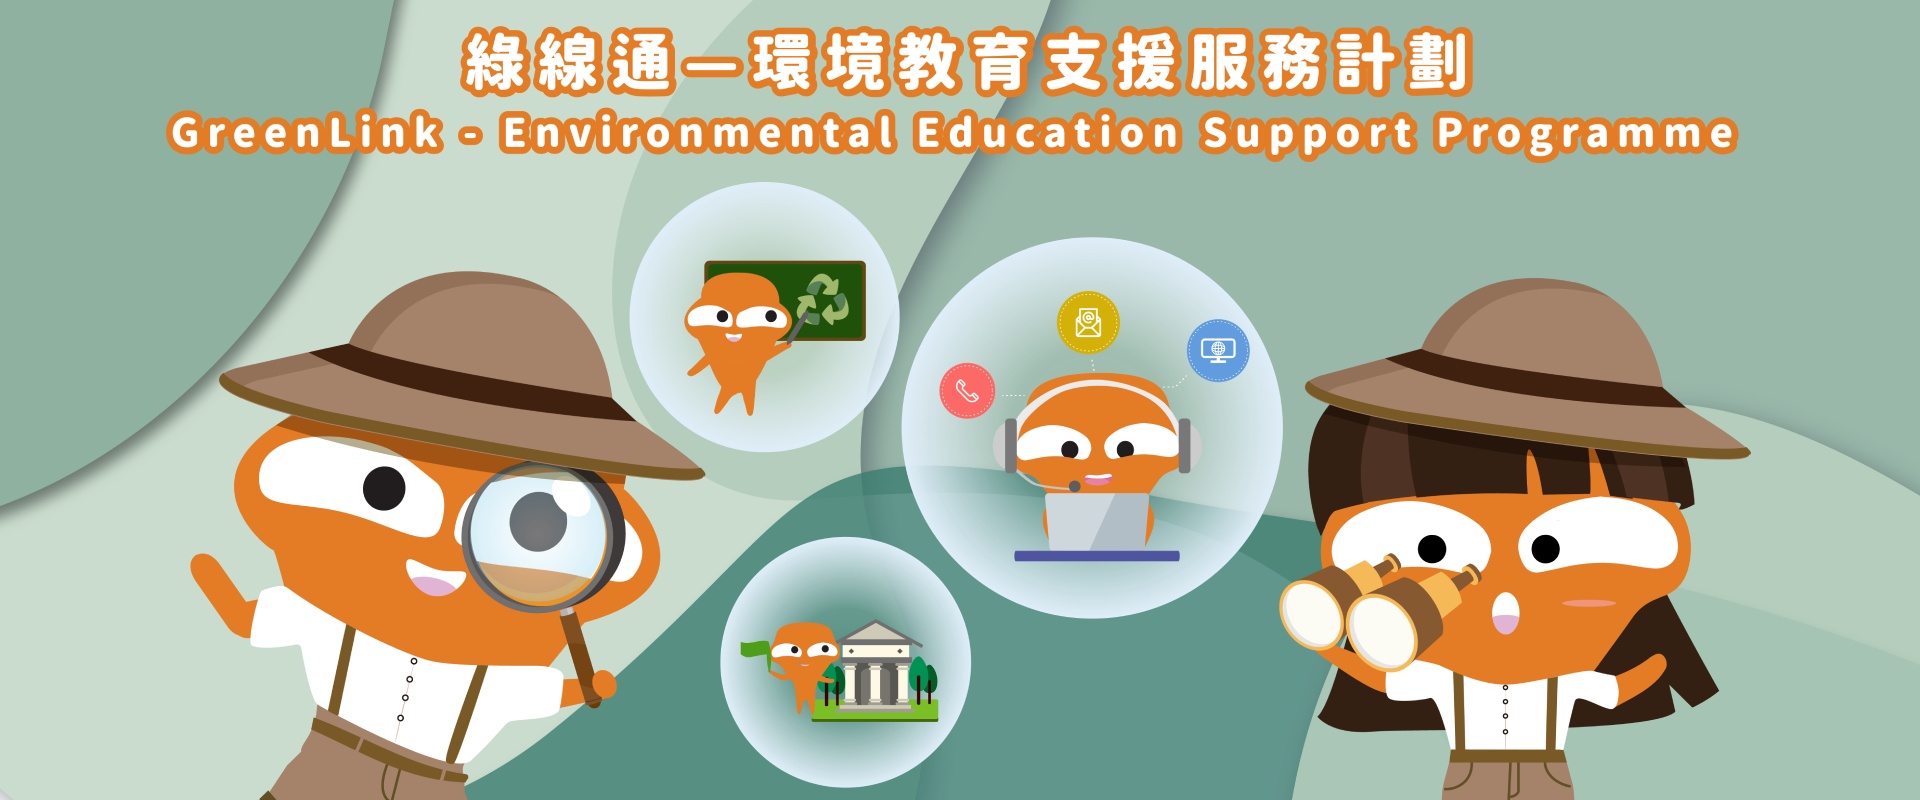 GreenLink - Environmental Education Support Programme 